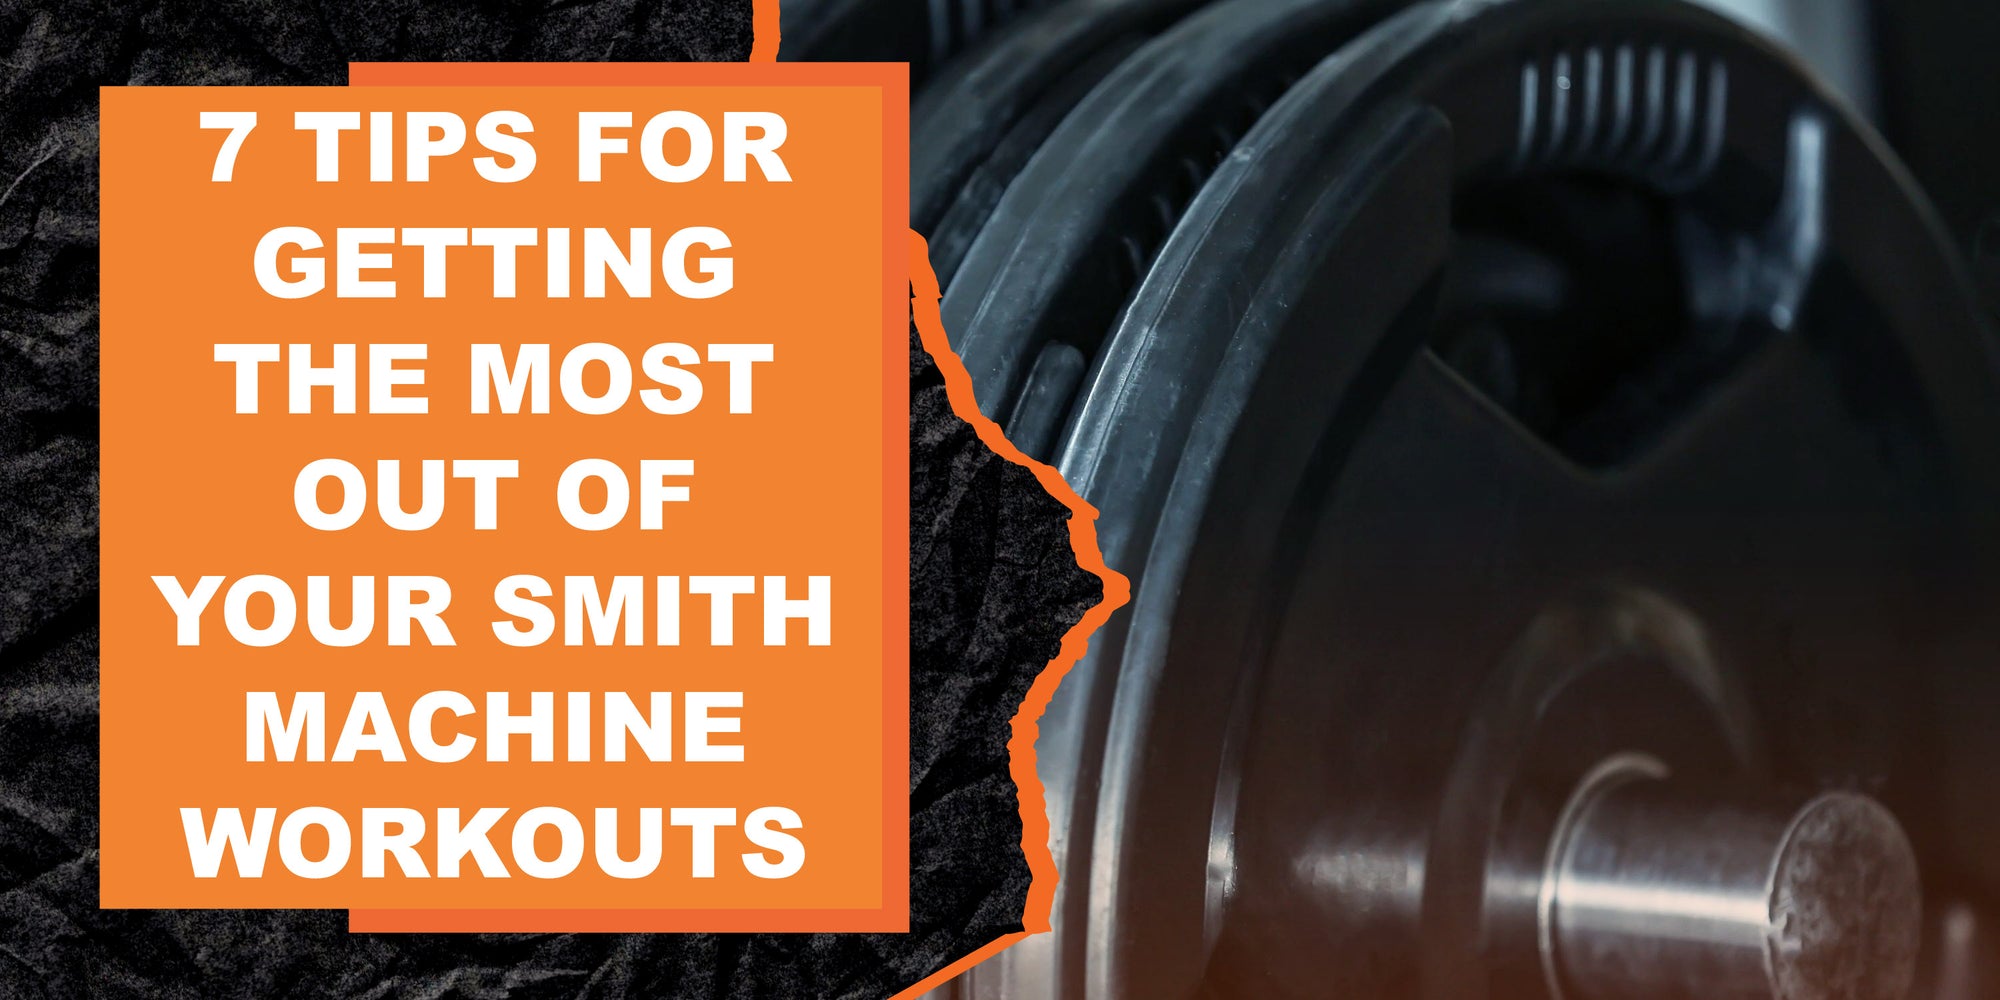 7 Tips for Getting the Most Out of Your Smith Machine Workouts